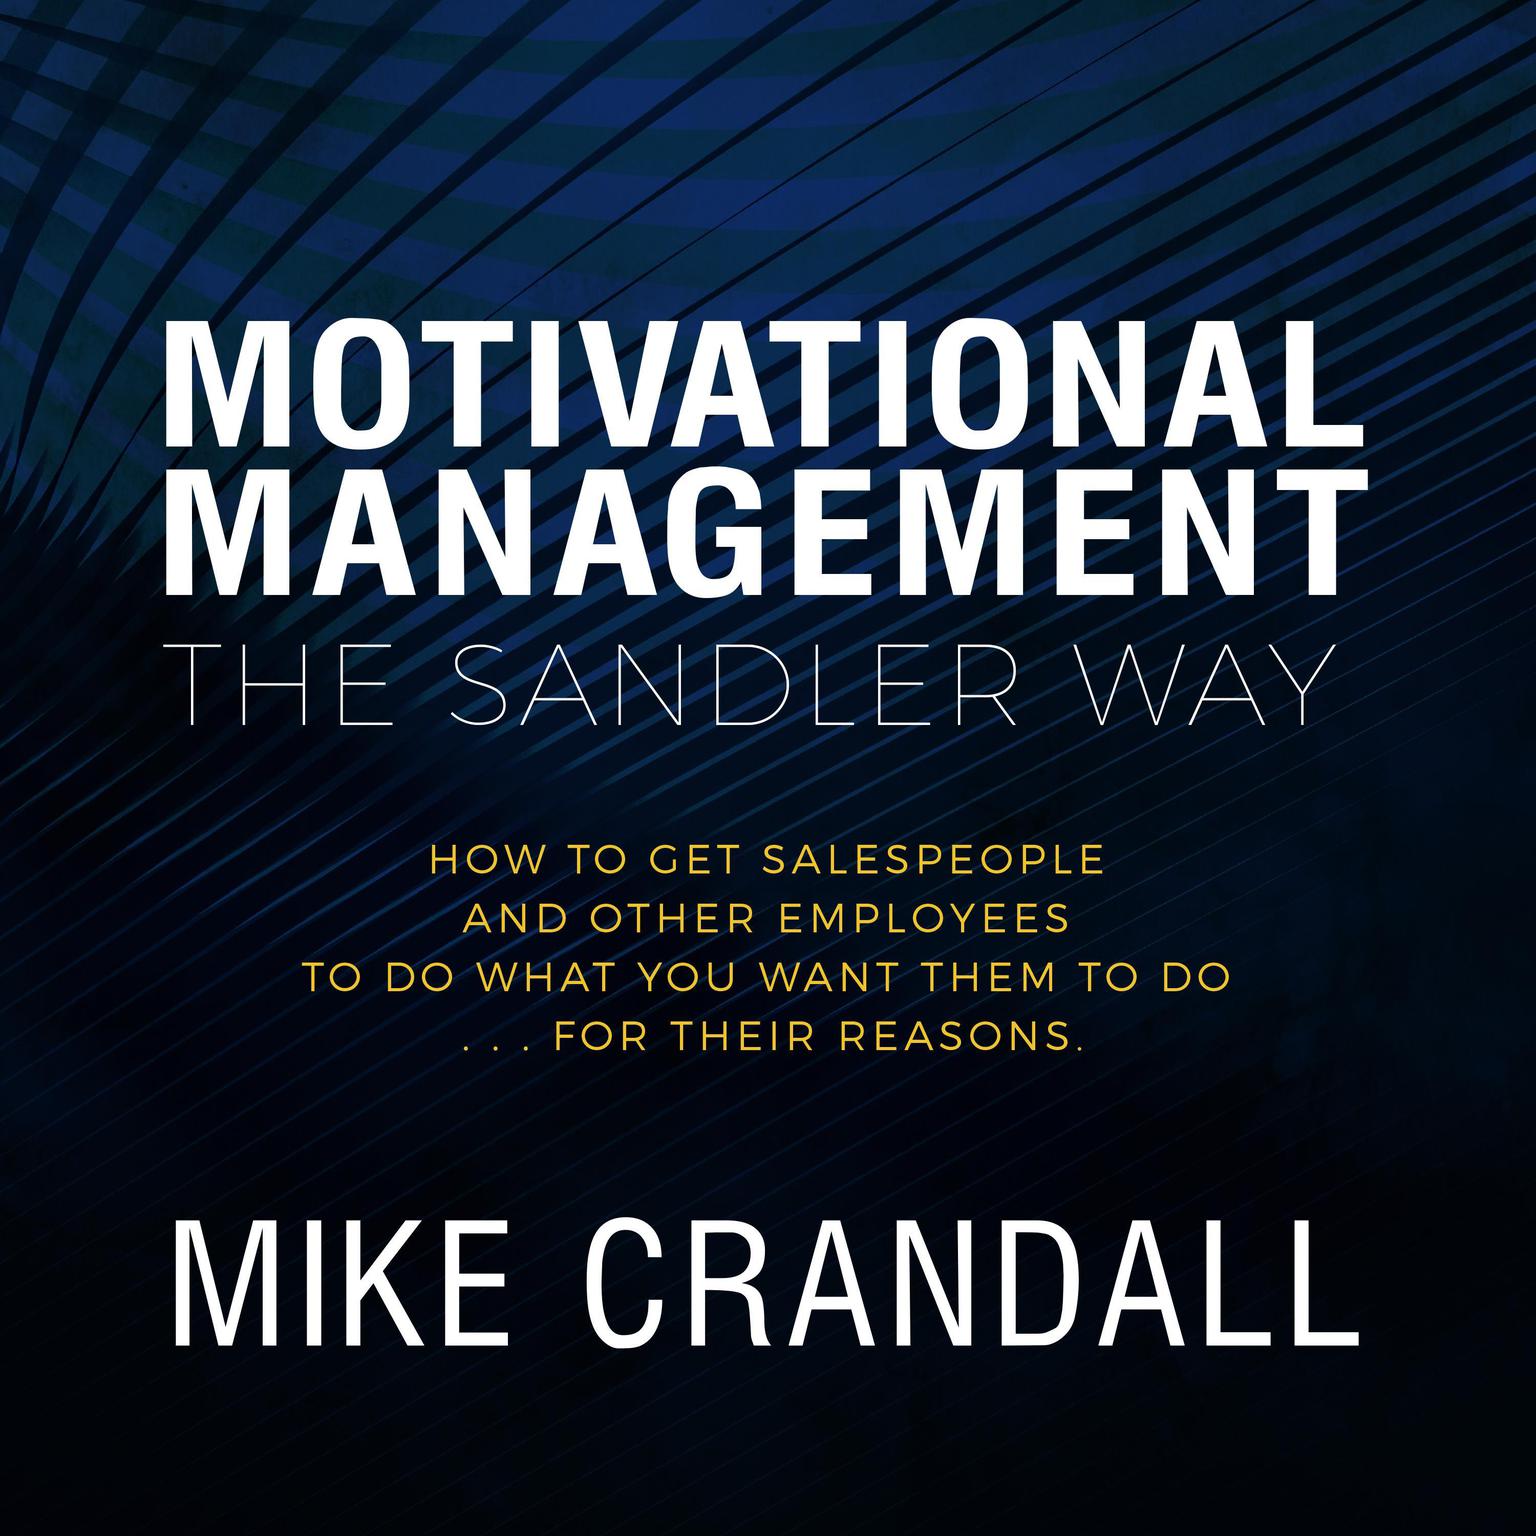 Motivational Management The Sandler Way Audiobook, by Mike Crandall